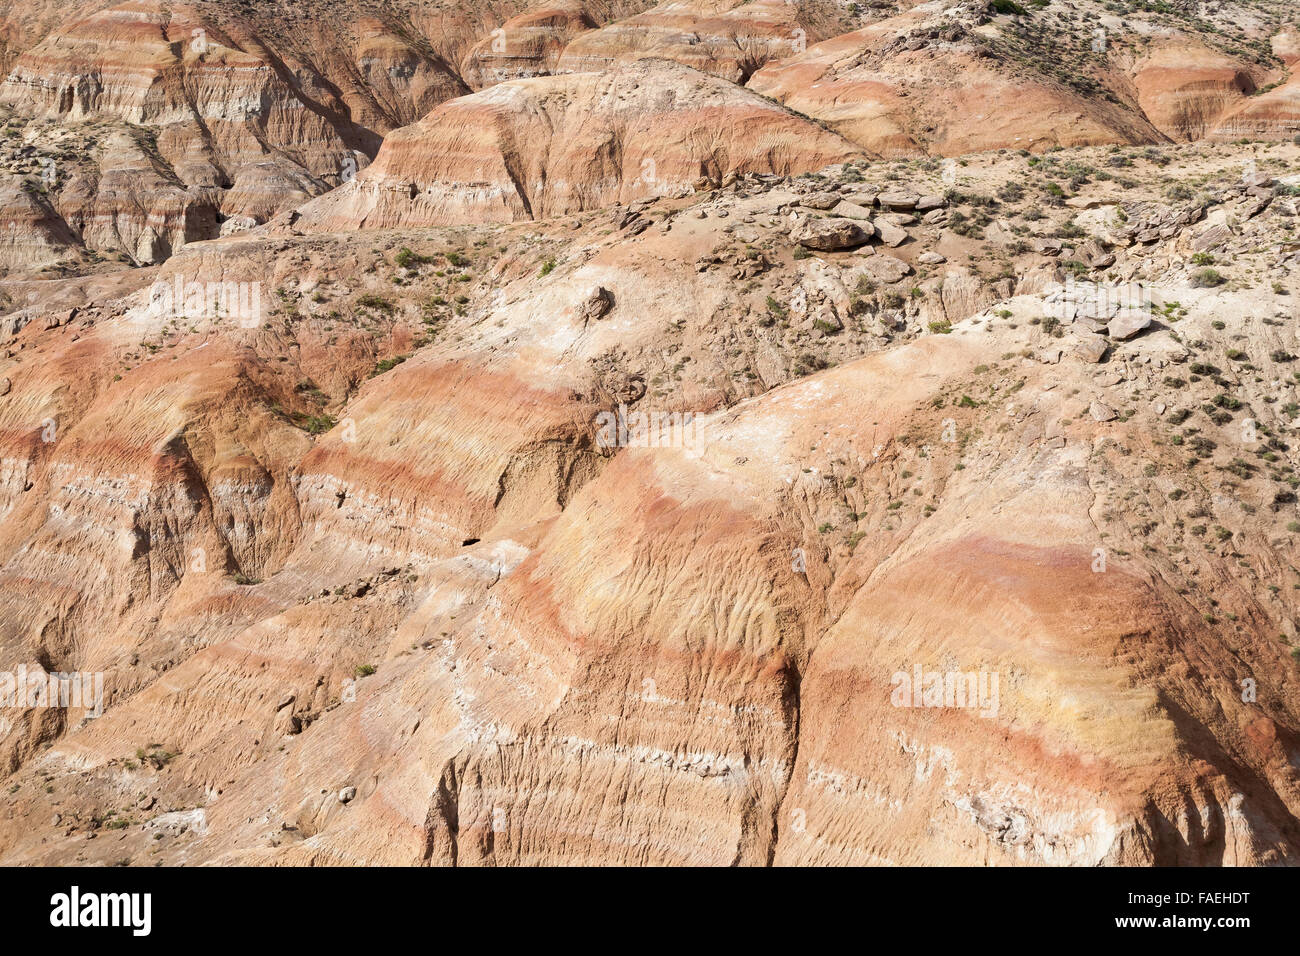 Eroded badlands create abstract shapes in the Bighorn Basin in north-central Wyoming. Stock Photo